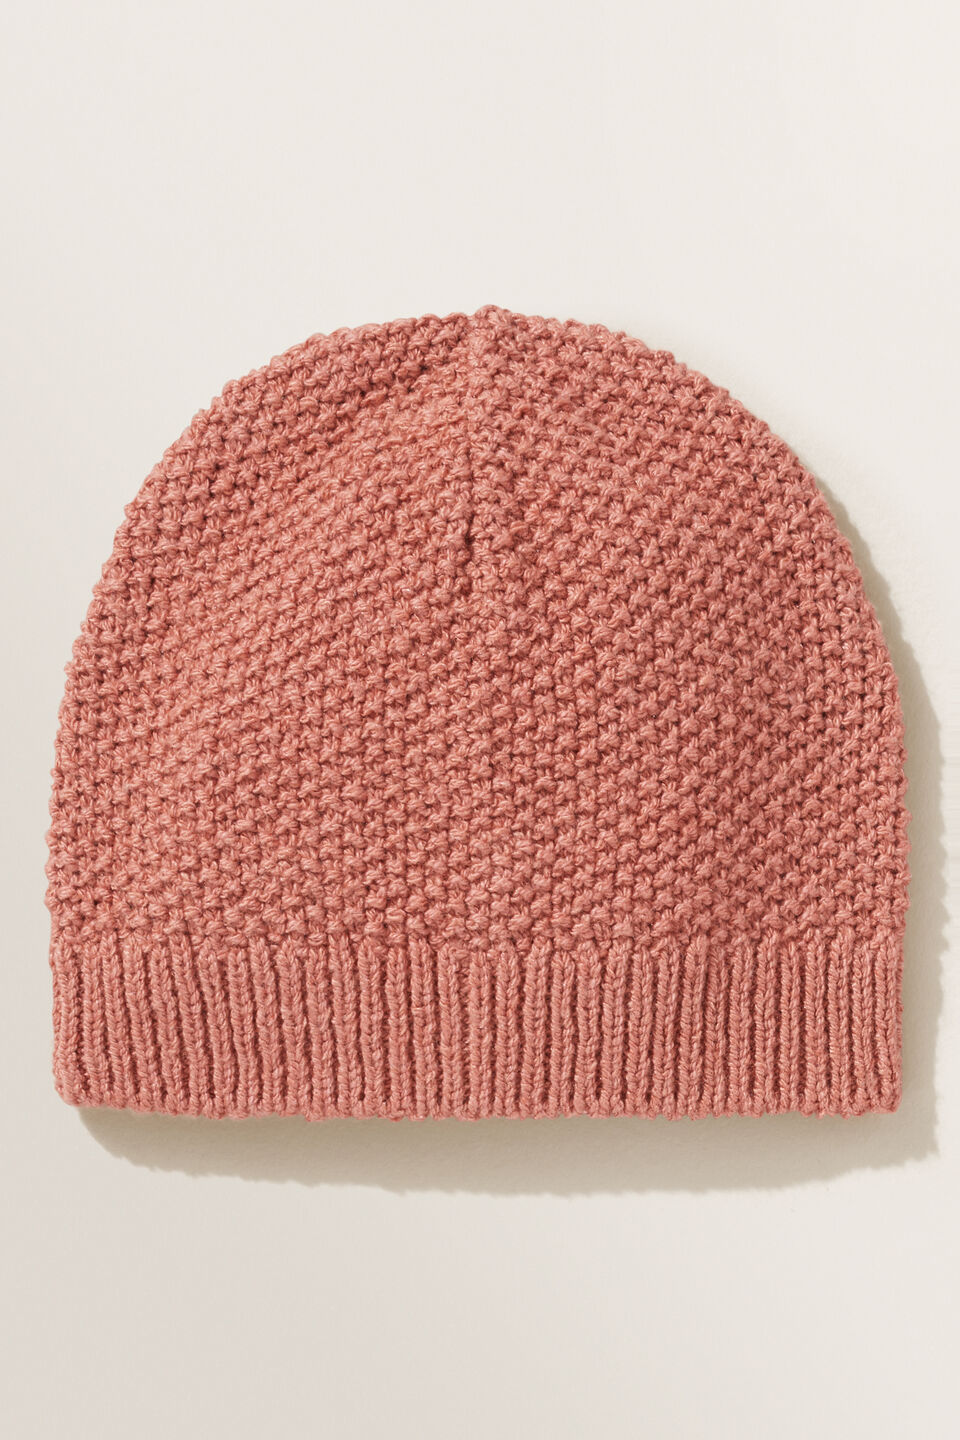 Textured Knit Beanie  Faded Rose